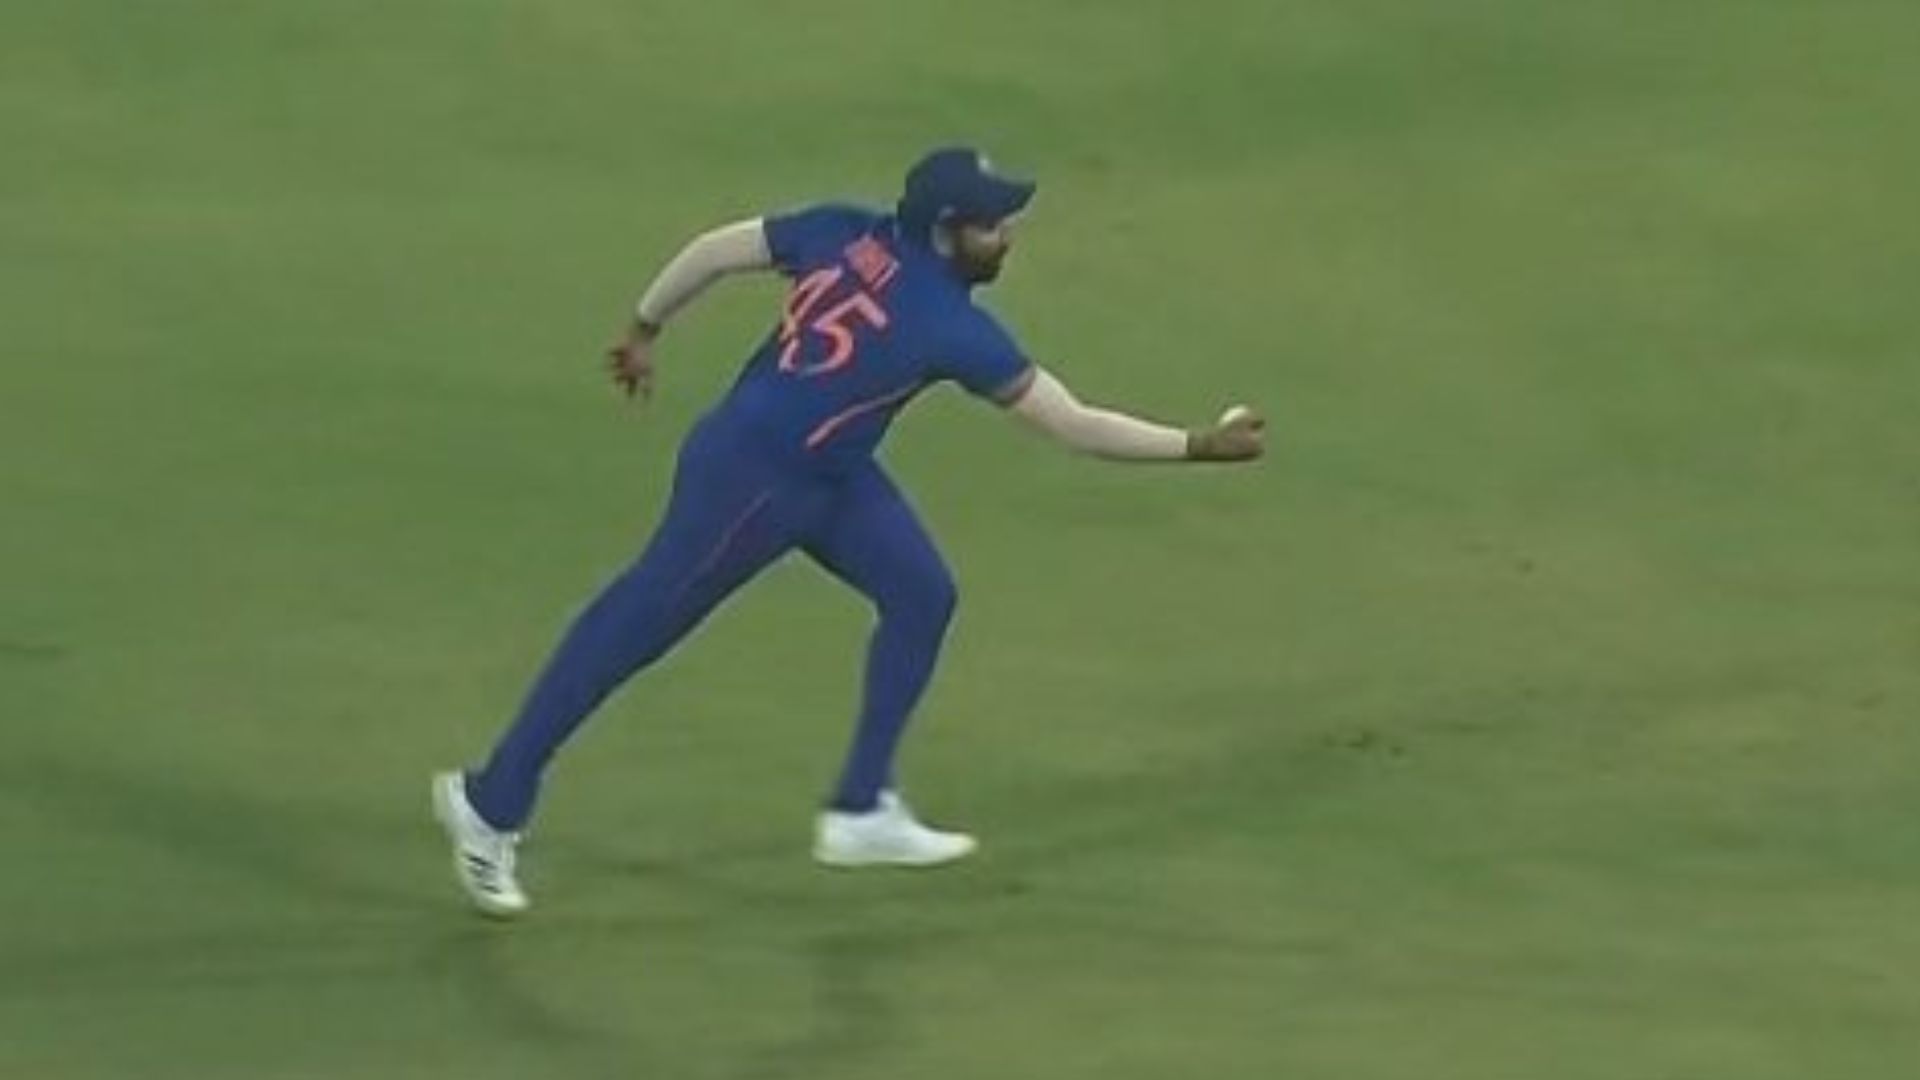 Rohit Sharma was himself surprised after holding onto the catch. (P.C.:Hotstar)